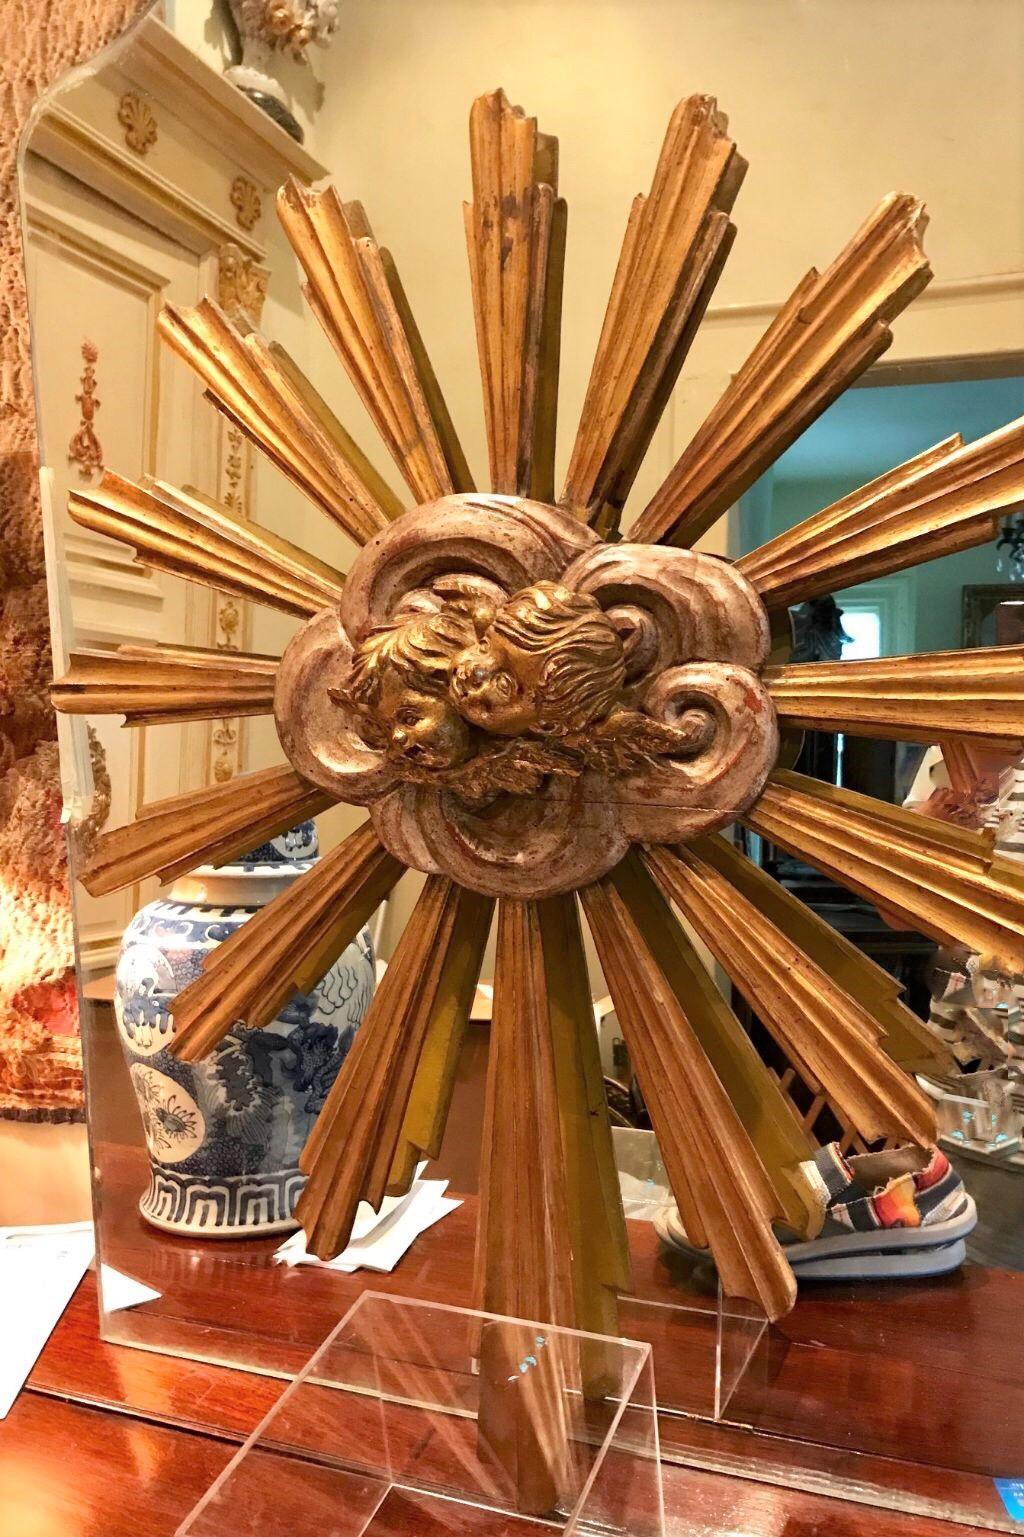 An intricately assembled carved Giltwood sunburst. The center affixed with silver leaf clouds and two cherubs ( or Angels) in relief. Bleeding of red bole throughout. Sturdy

Minor age/ shrinkage cracks. Rubbing and oxidation to the gilt finishes.